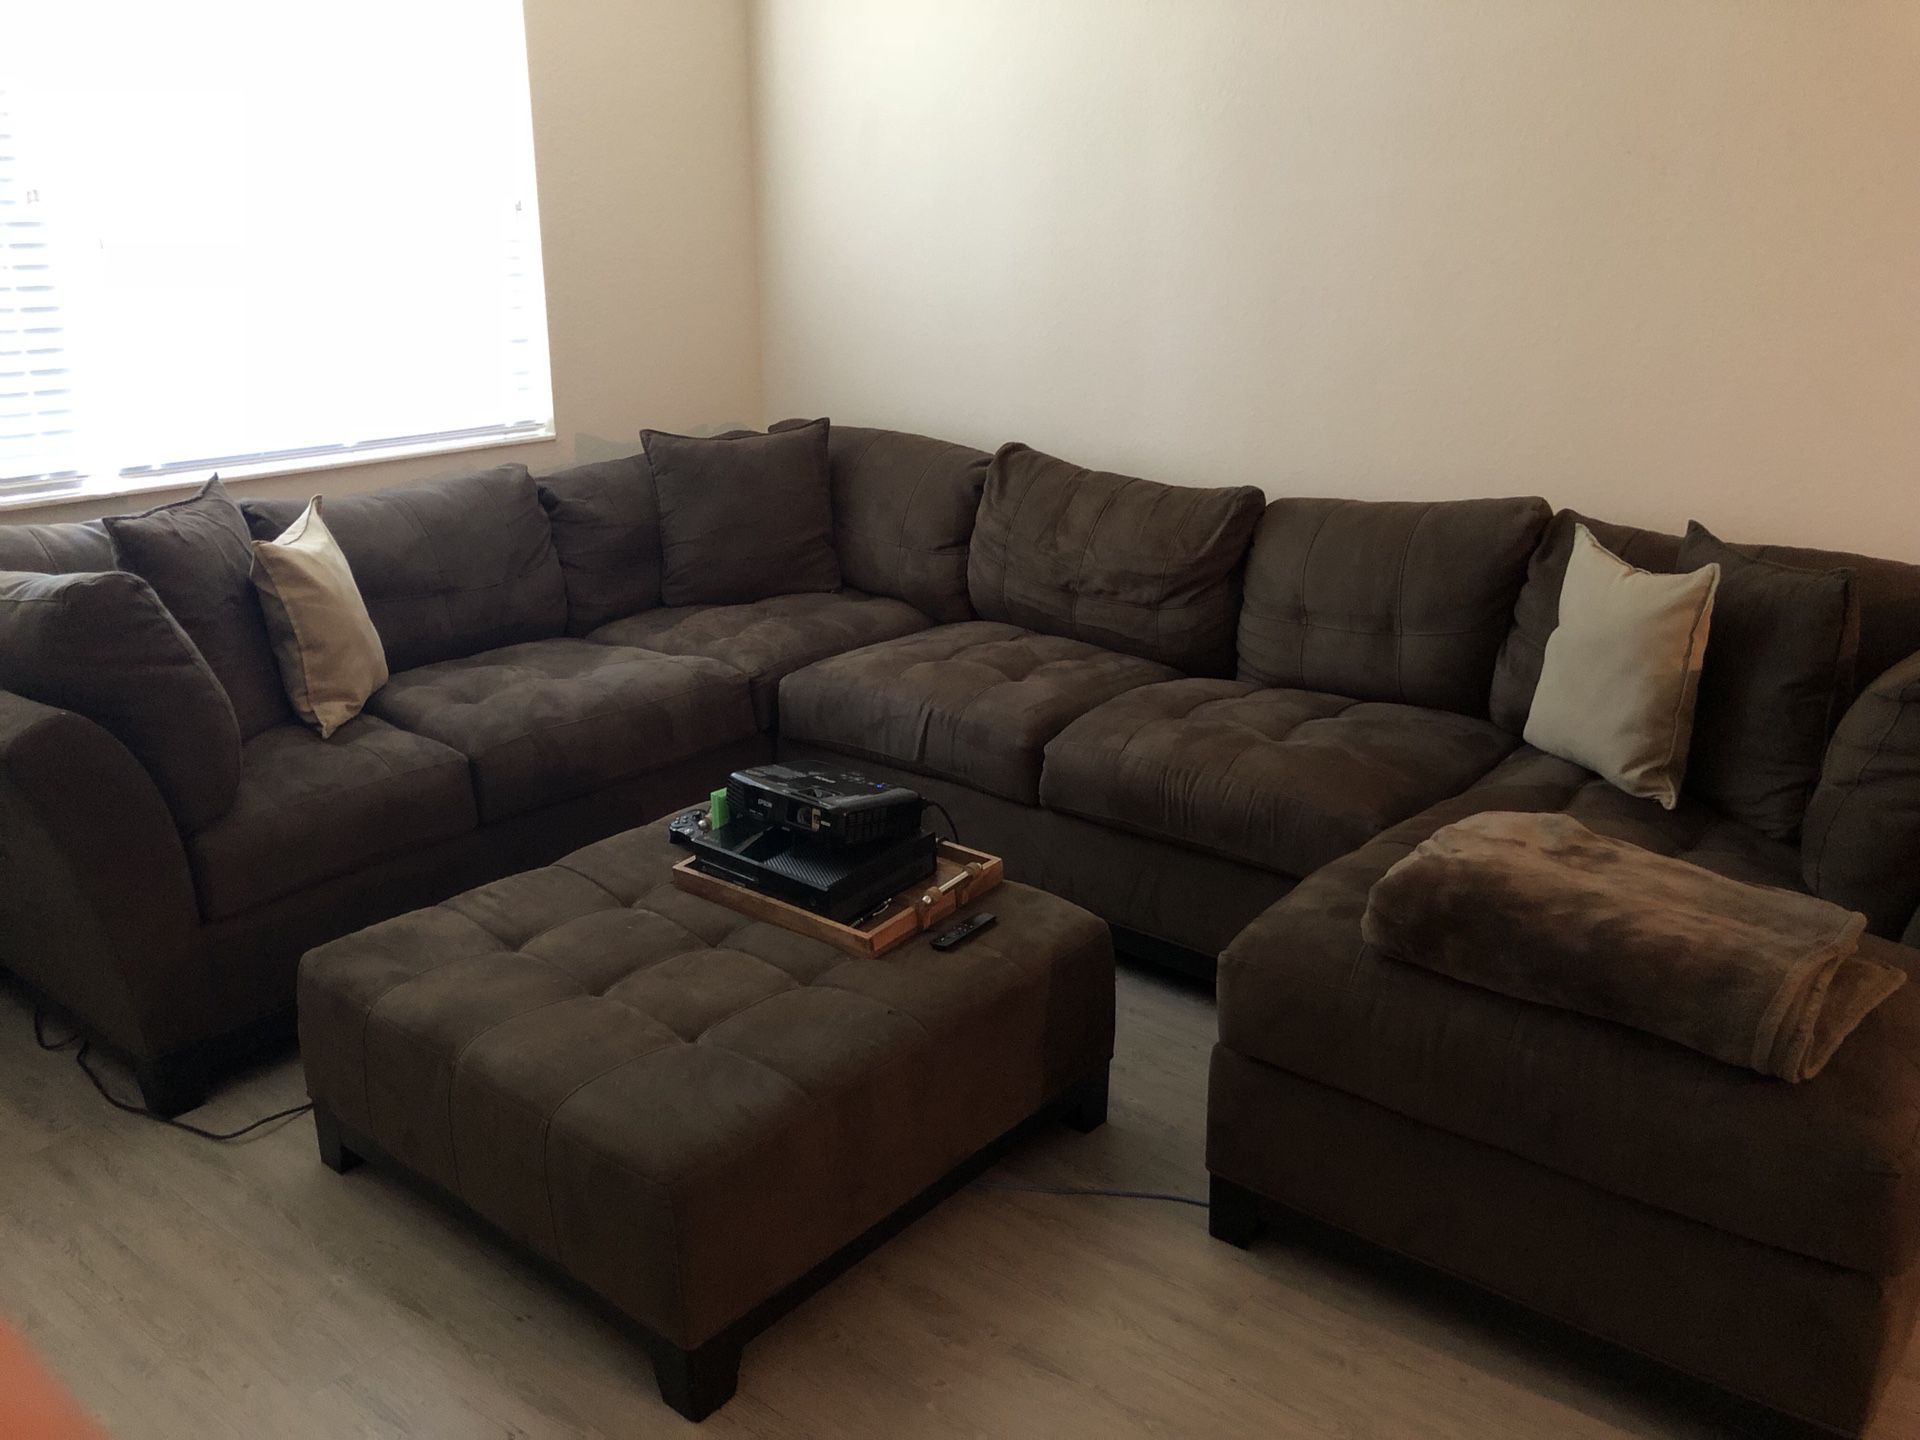 Big couch and ottoman